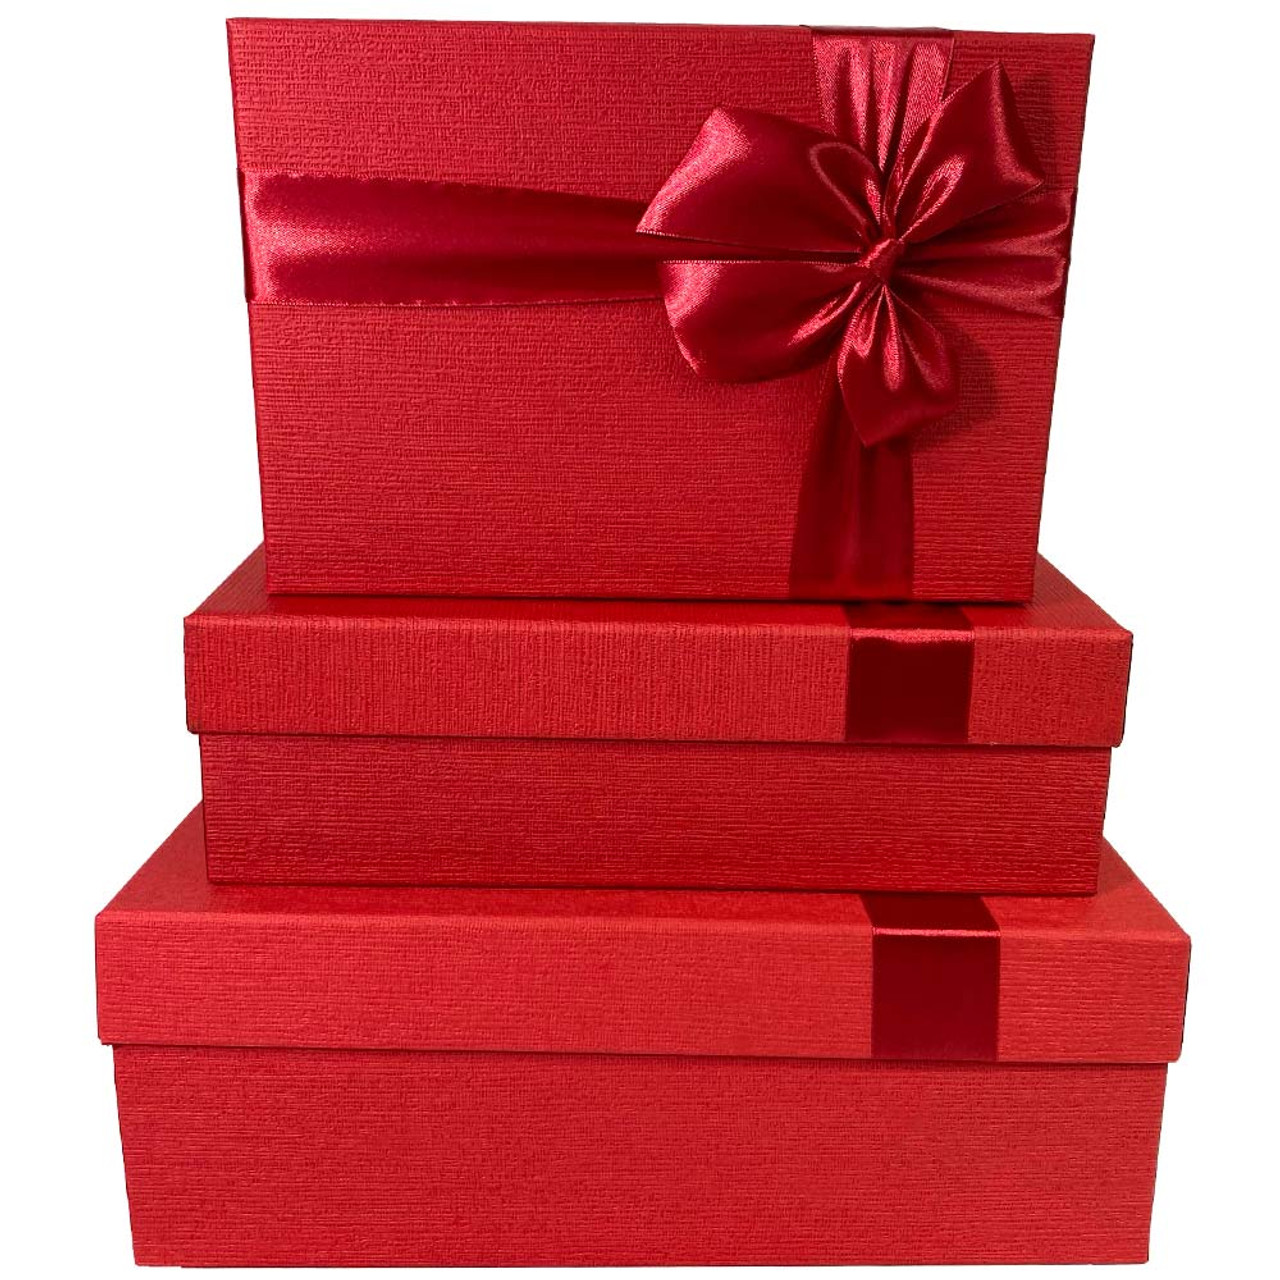 12 White & Red Floral Heart Gift Box with Ribbon - Set of 3 - LO